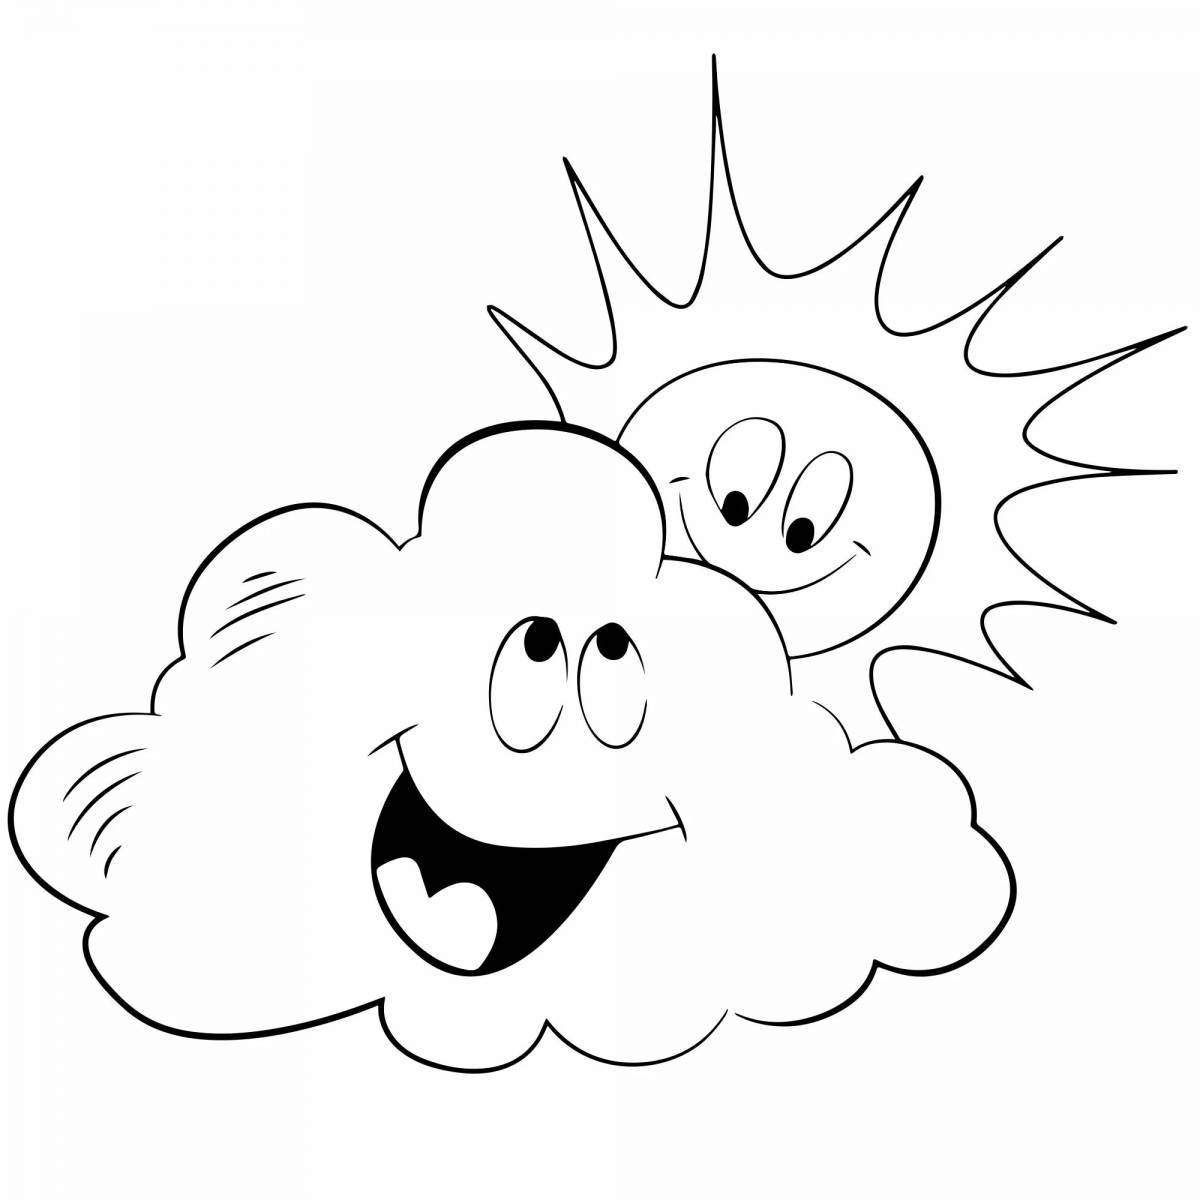 Cloud for kids #4